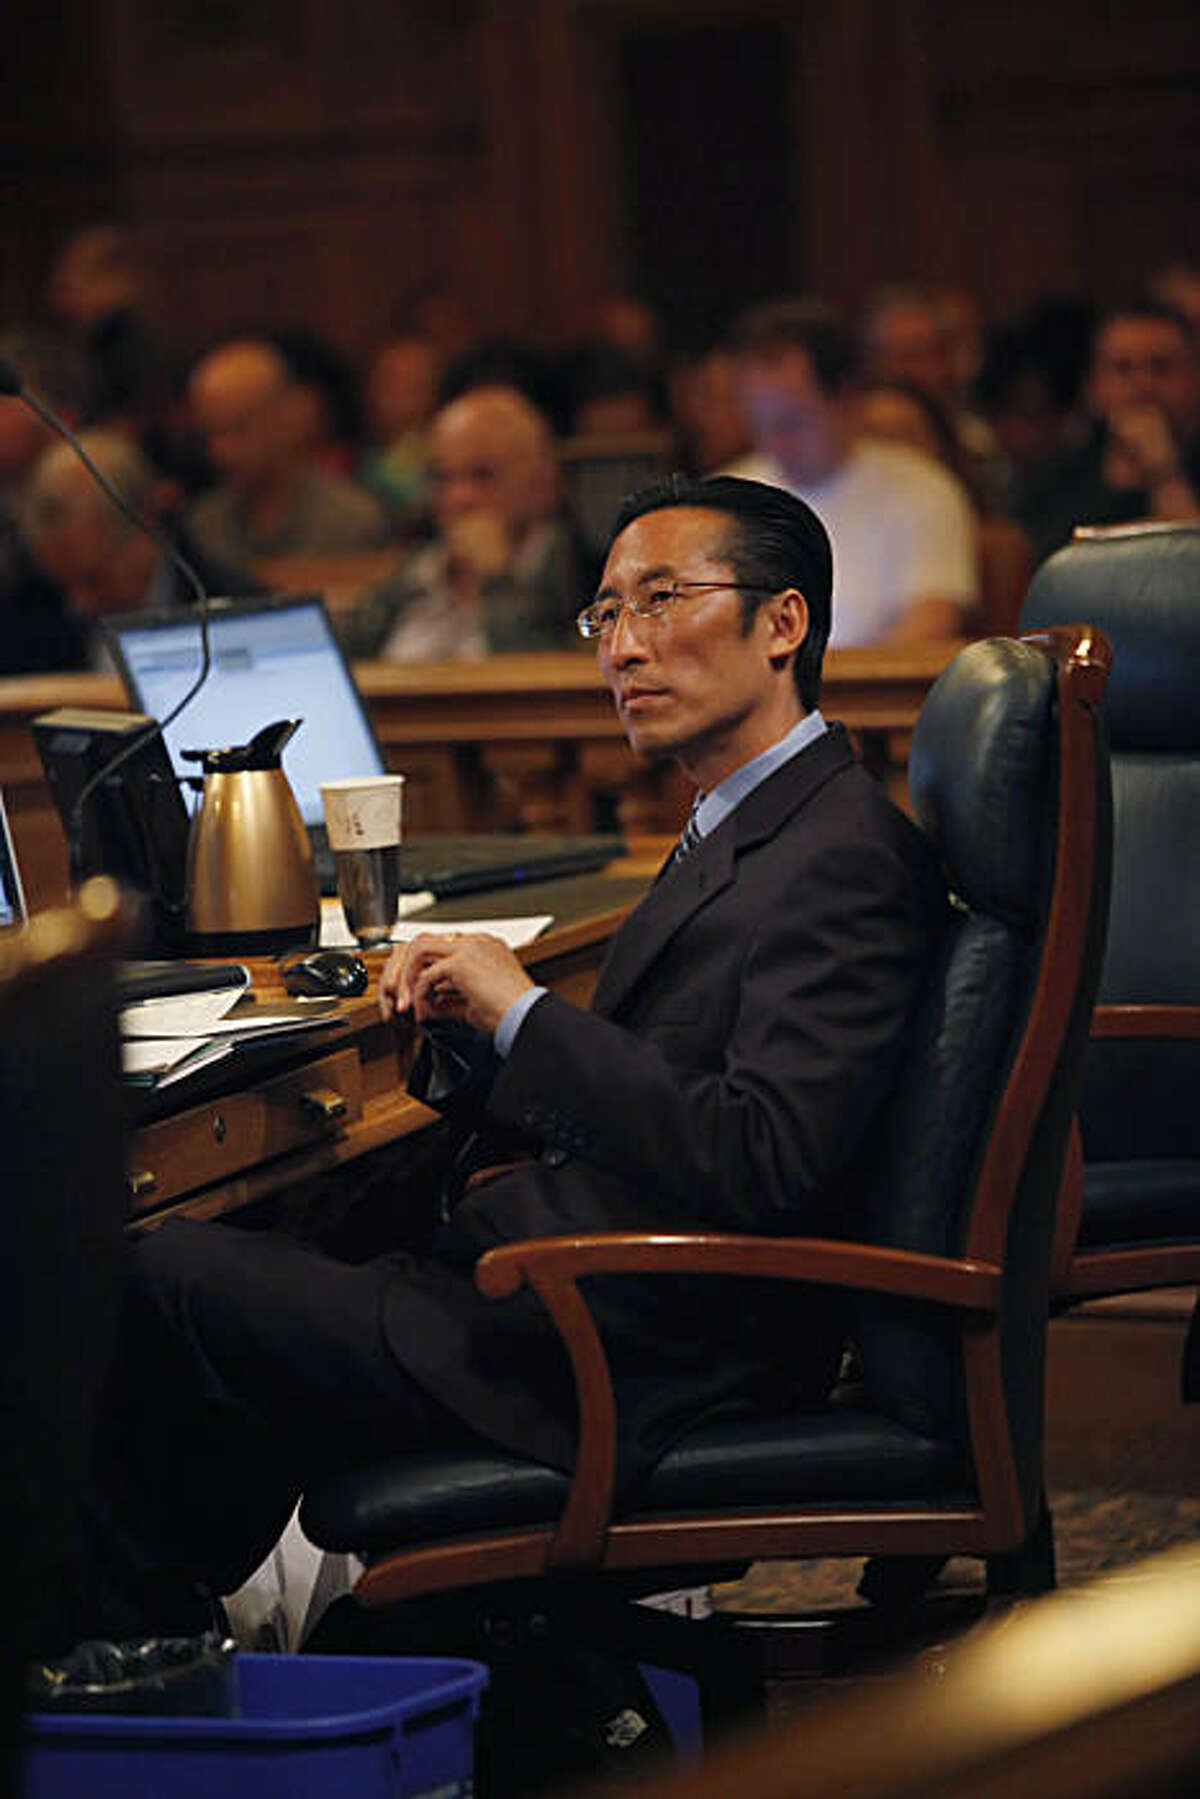 Supervisor Eric Mar listens to a speaker during the San Francisco Board of Supervisors meeting at City Hall in San Francisco, Calif. on Tuesday May 4, 2010.